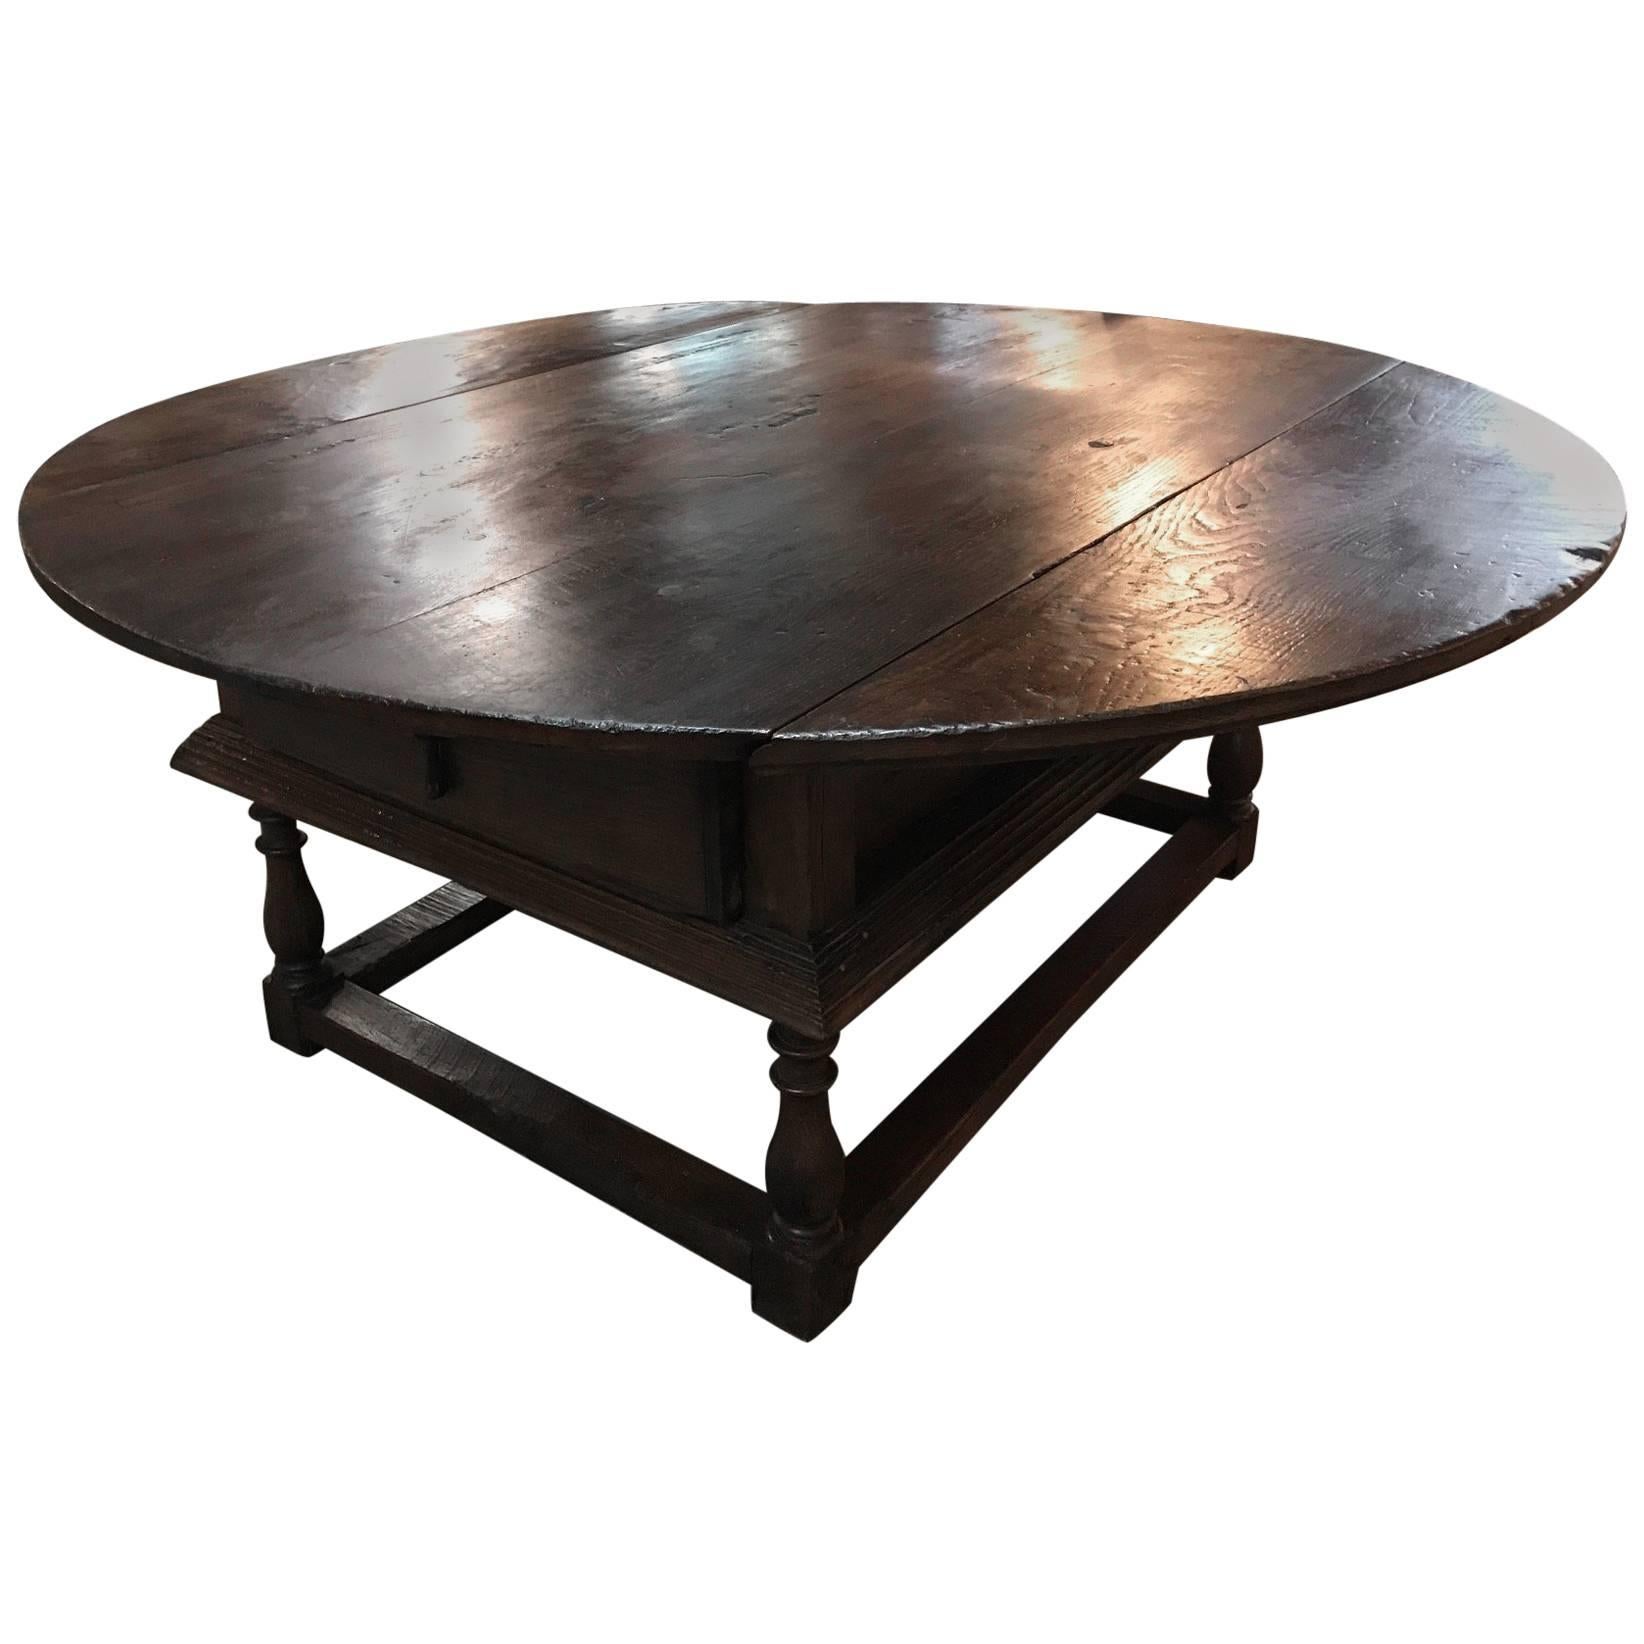 Outstanding and Rare Early 18th Century Italian  Round Table